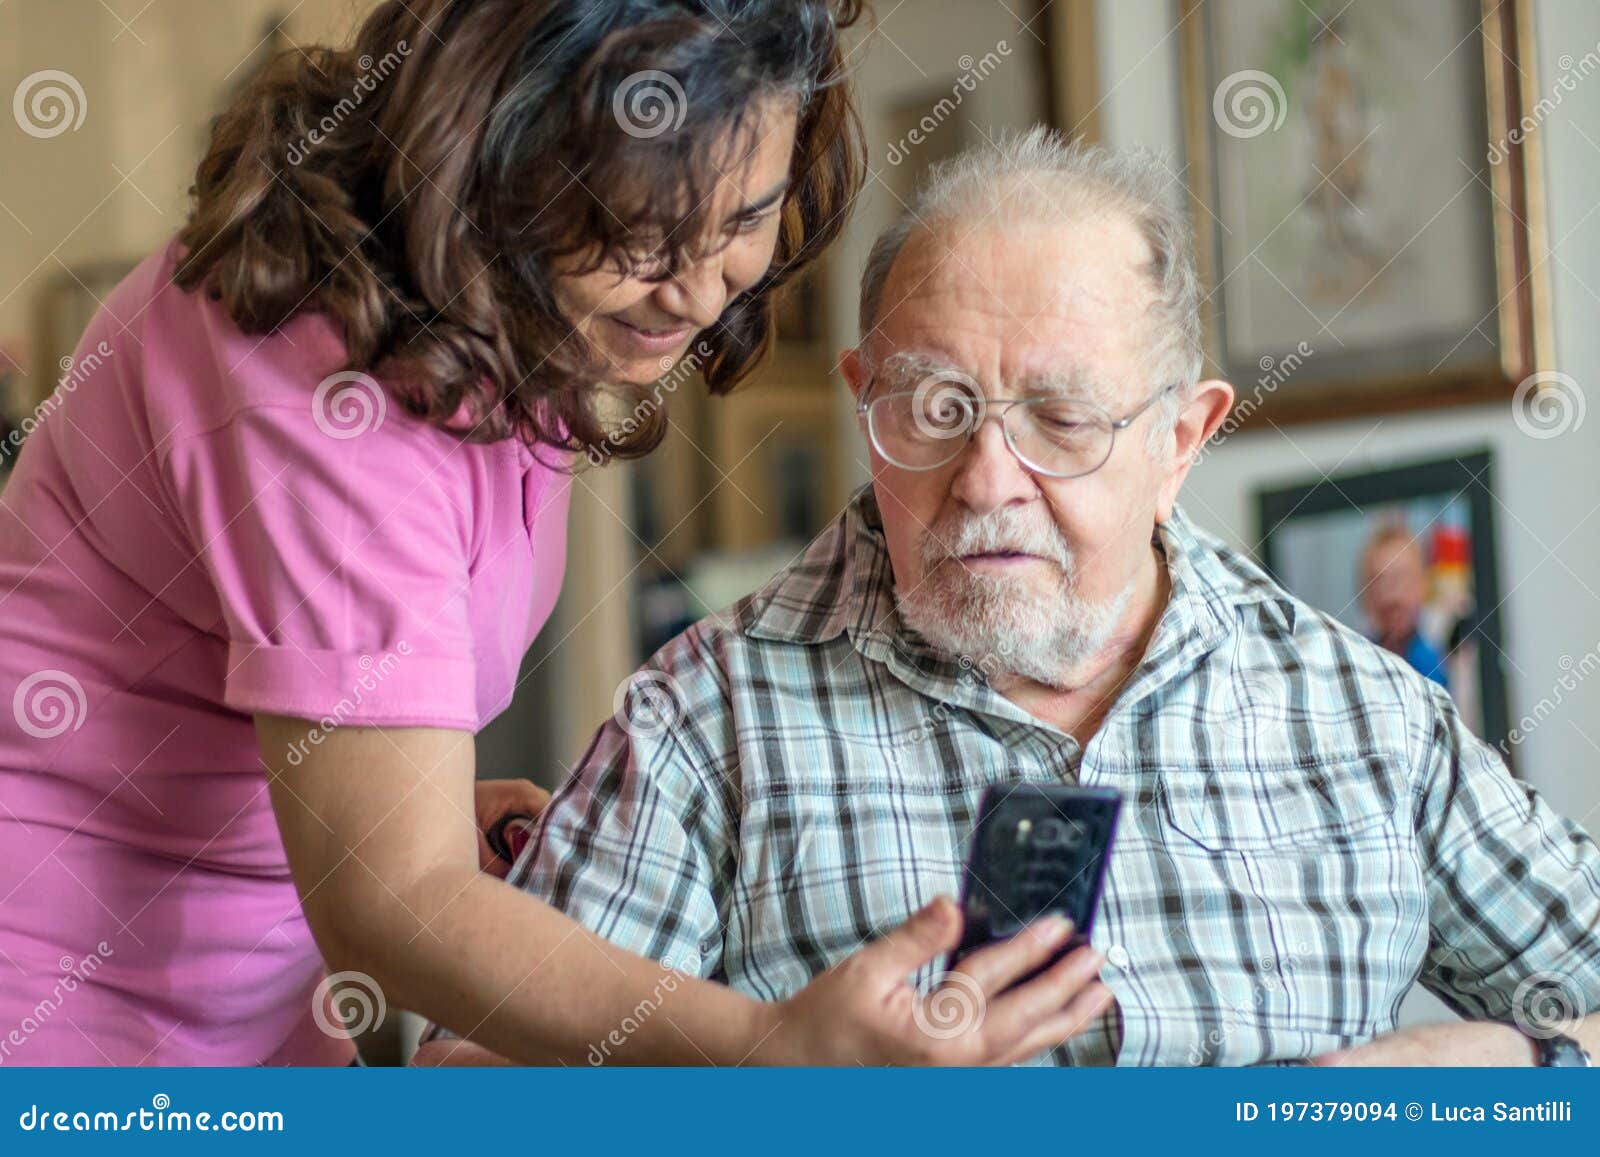 a smiling senior man and caregiver with smartphone are doing a videocall